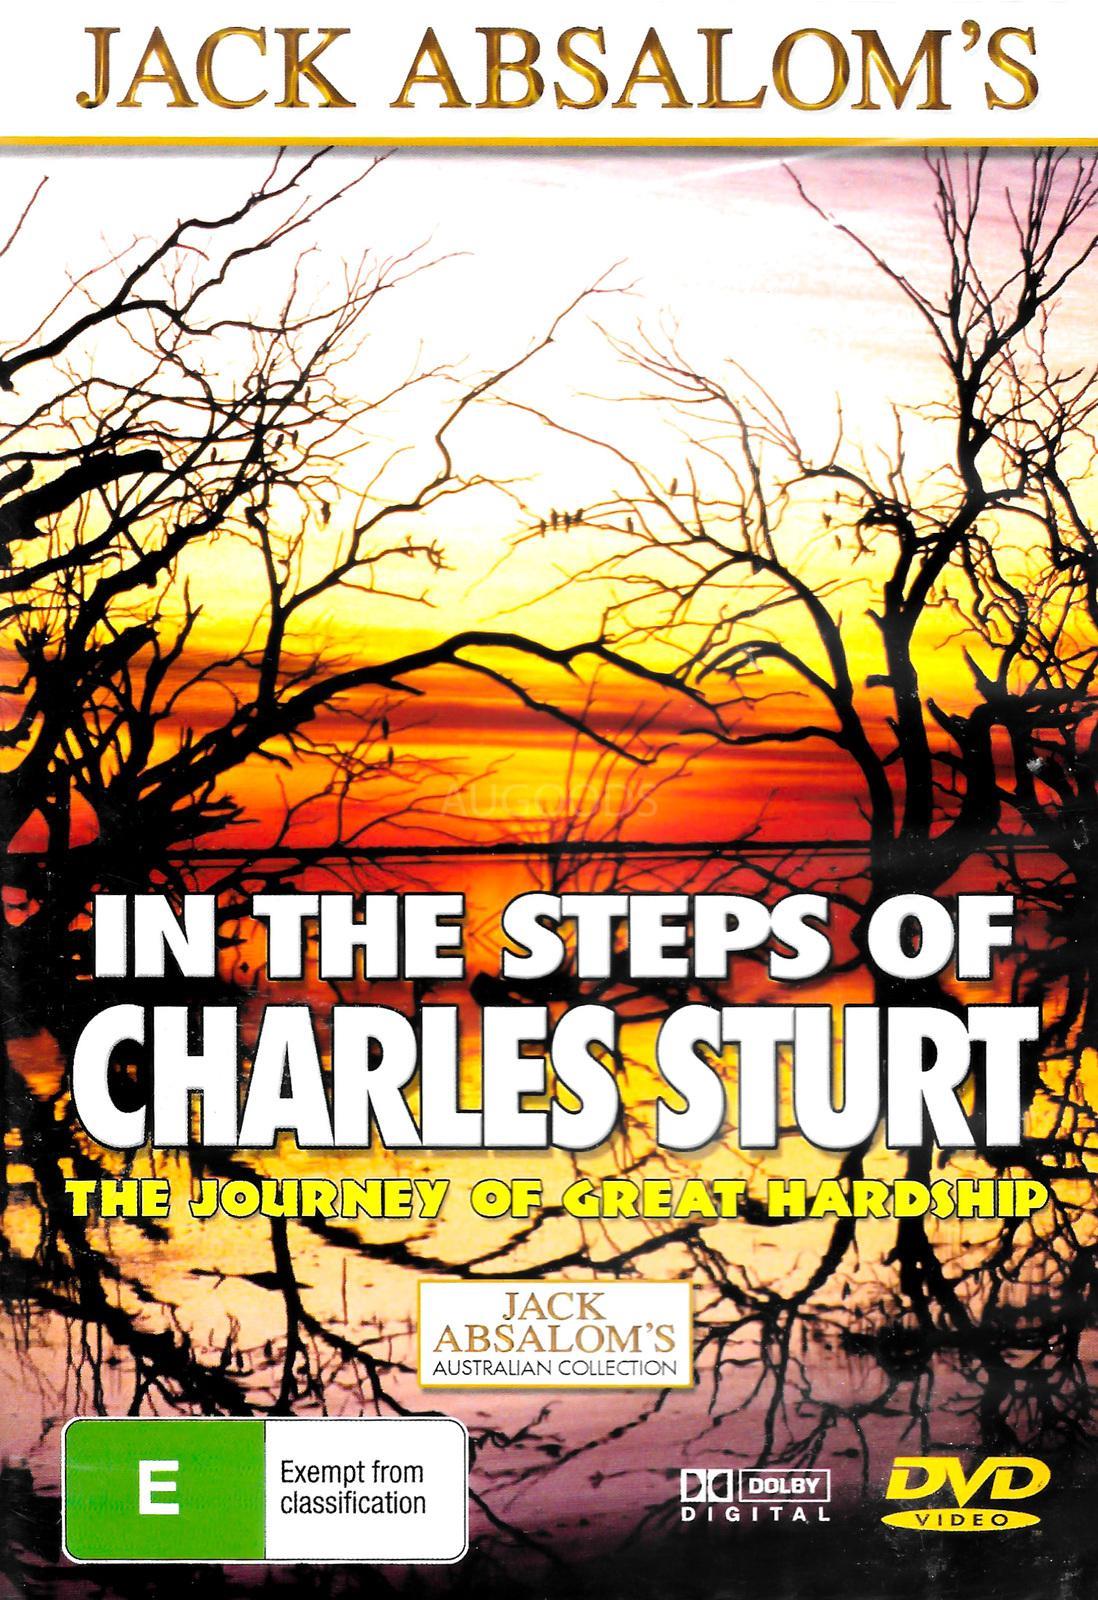 In The Steps Of Charles Sturt Jack Absalom -Educational DVD Series New